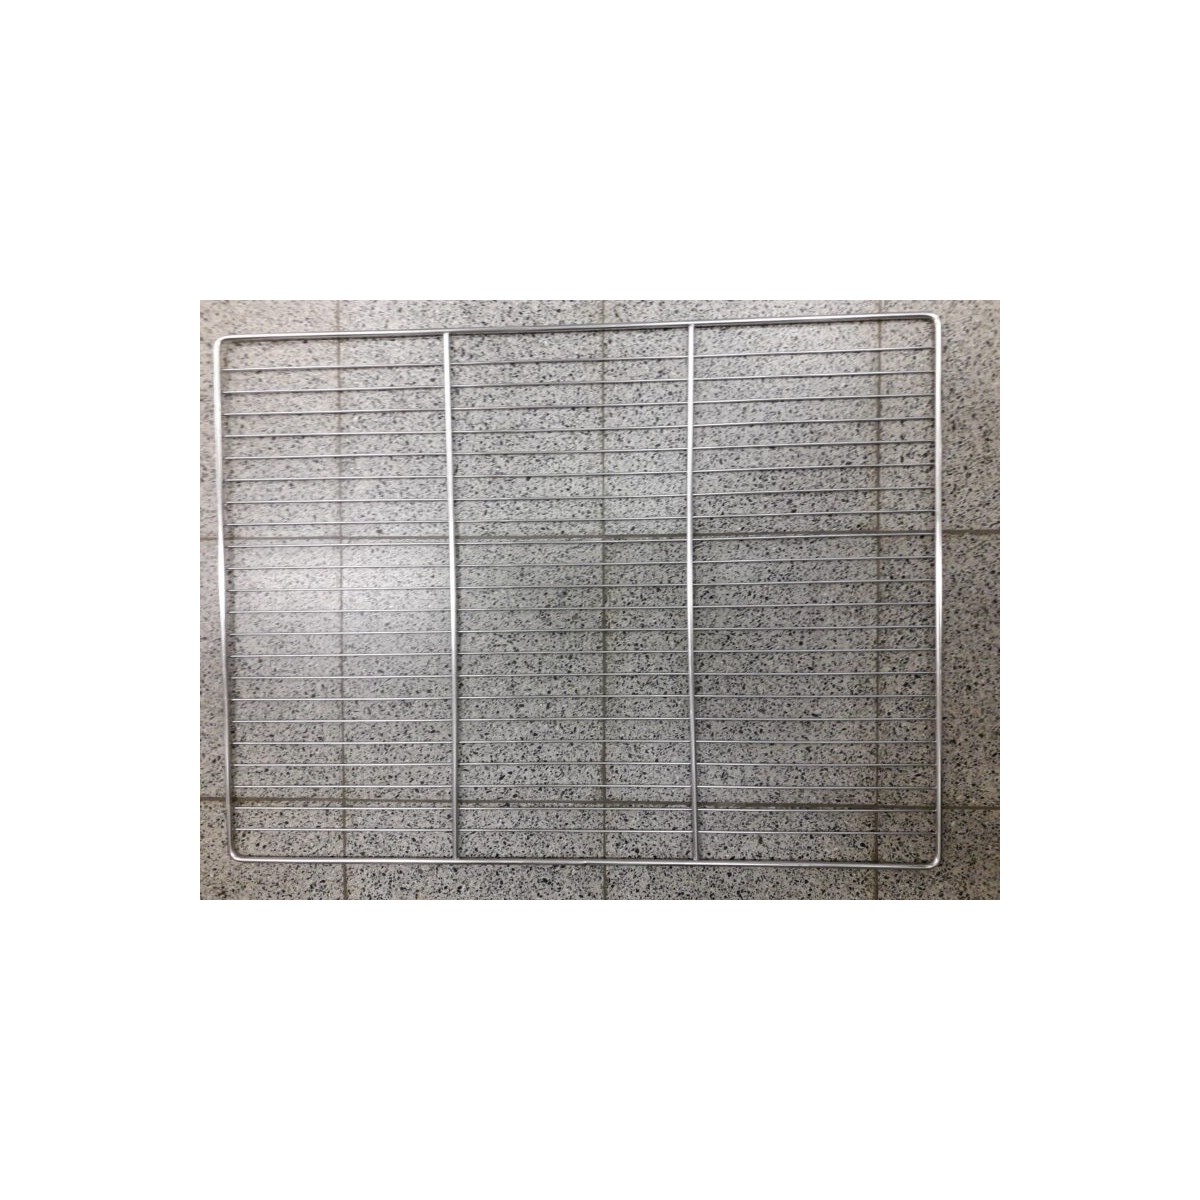 STAINLESS STEEL GRID "LIGHT" 7MM 60X80CM 22 WIRES/